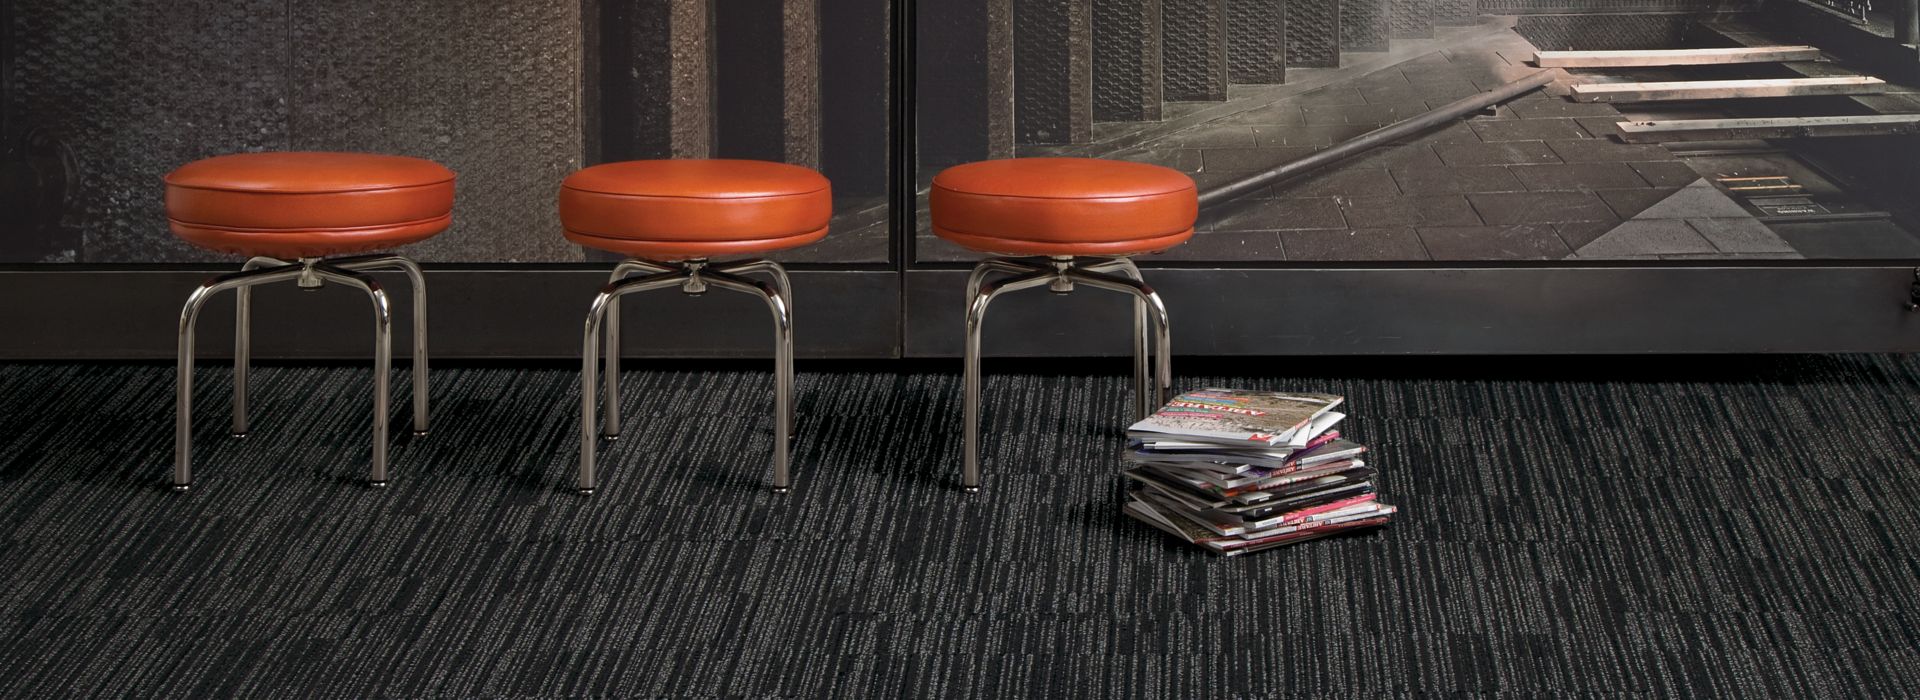 Interface CT102 carpet tile in open area with three red stools and stack of books